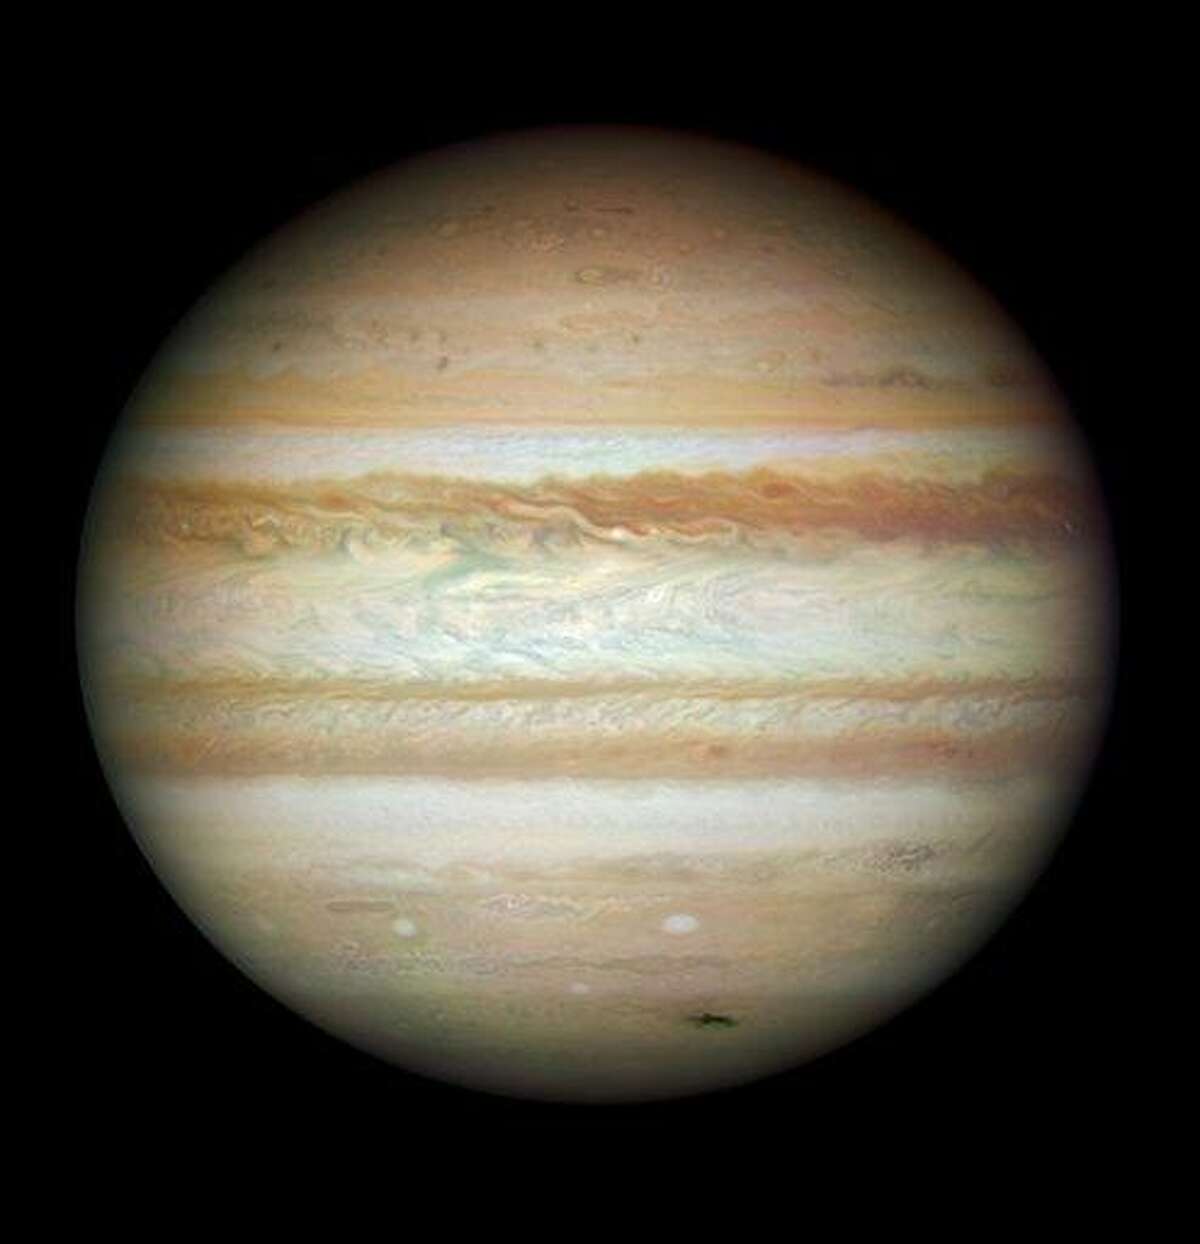 The planet Jupiter is seen in an undated handout file image provided by NASA, released Wednesday, Sept. 9, 2009, taken by the refurbished Hubble Space Telescope.  (AP Photo/NASA)